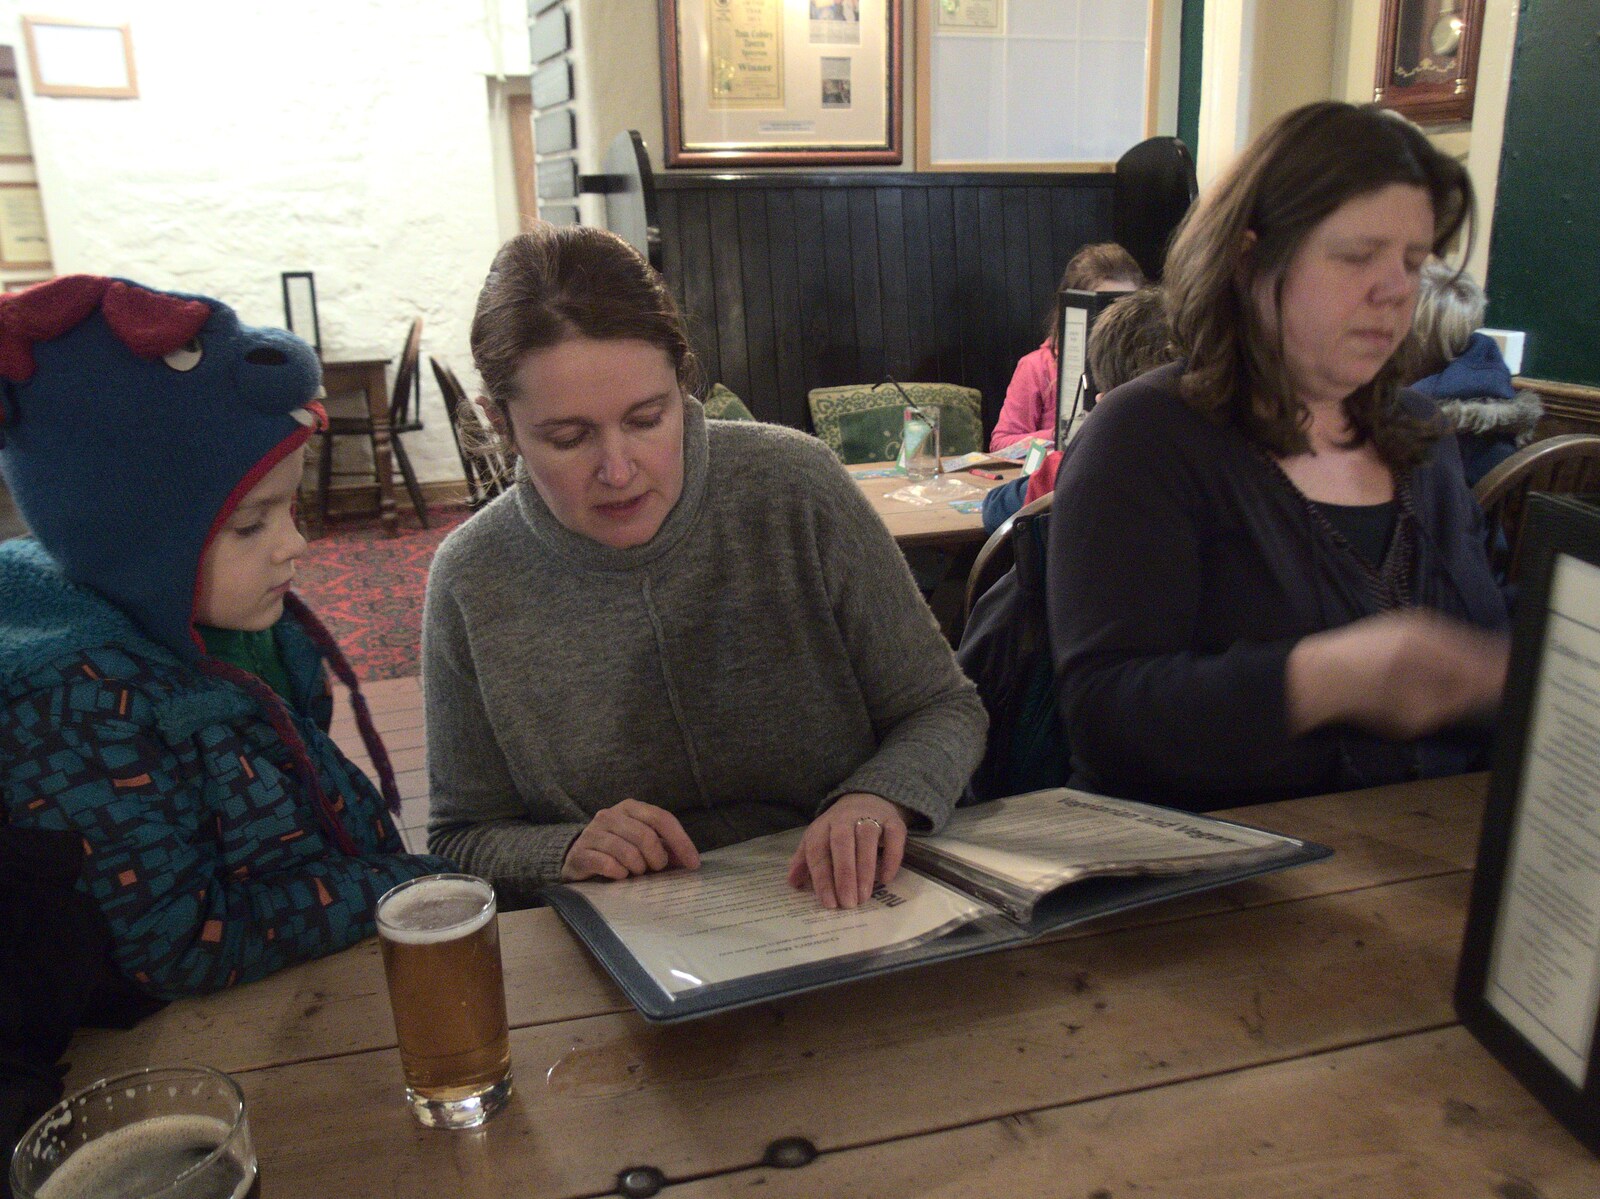 Isobel reads the menu to Harry from An End-of-Year Trip to Spreyton, Devon - 29th December 2017